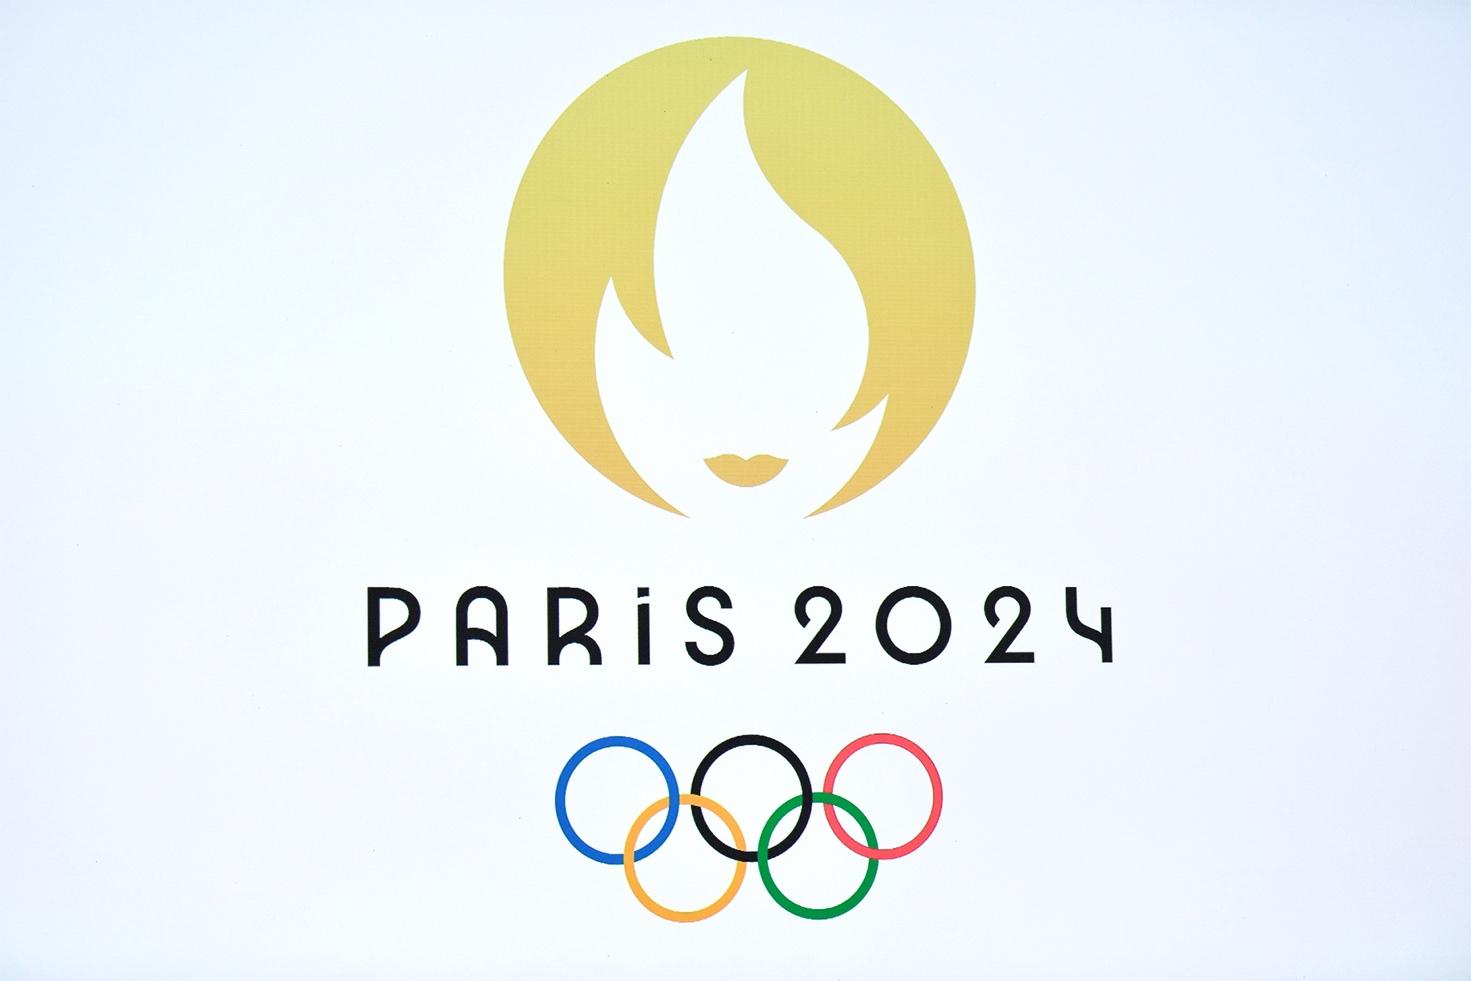 A logo with a flame and rings

Description automatically generated